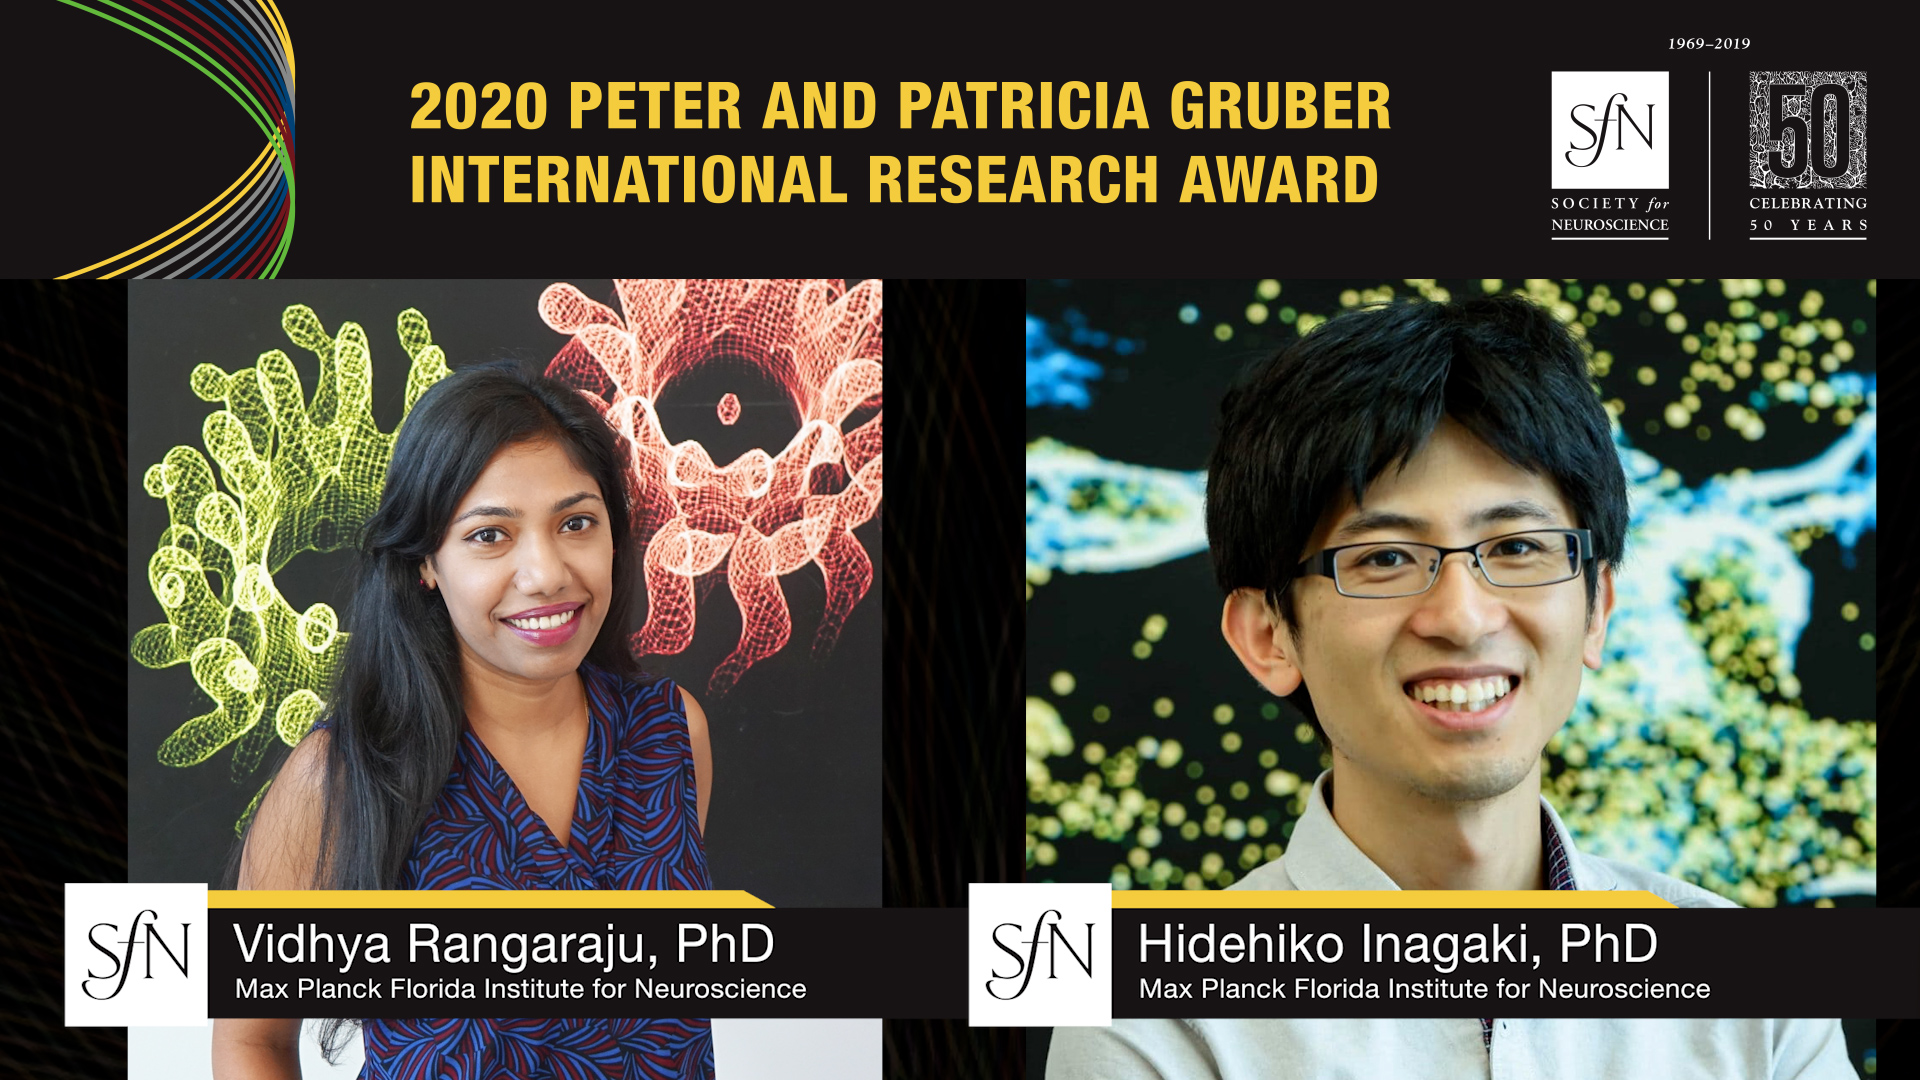 2020 Peter and Patricia Gruber International Research Award winners graphic, images of Vidhya Rangaraju, PhD Max Planck Florida Institute for Neuroscience, Hidehiko Inagaki, PhD Max Planck Florida Institute for Neuroscience